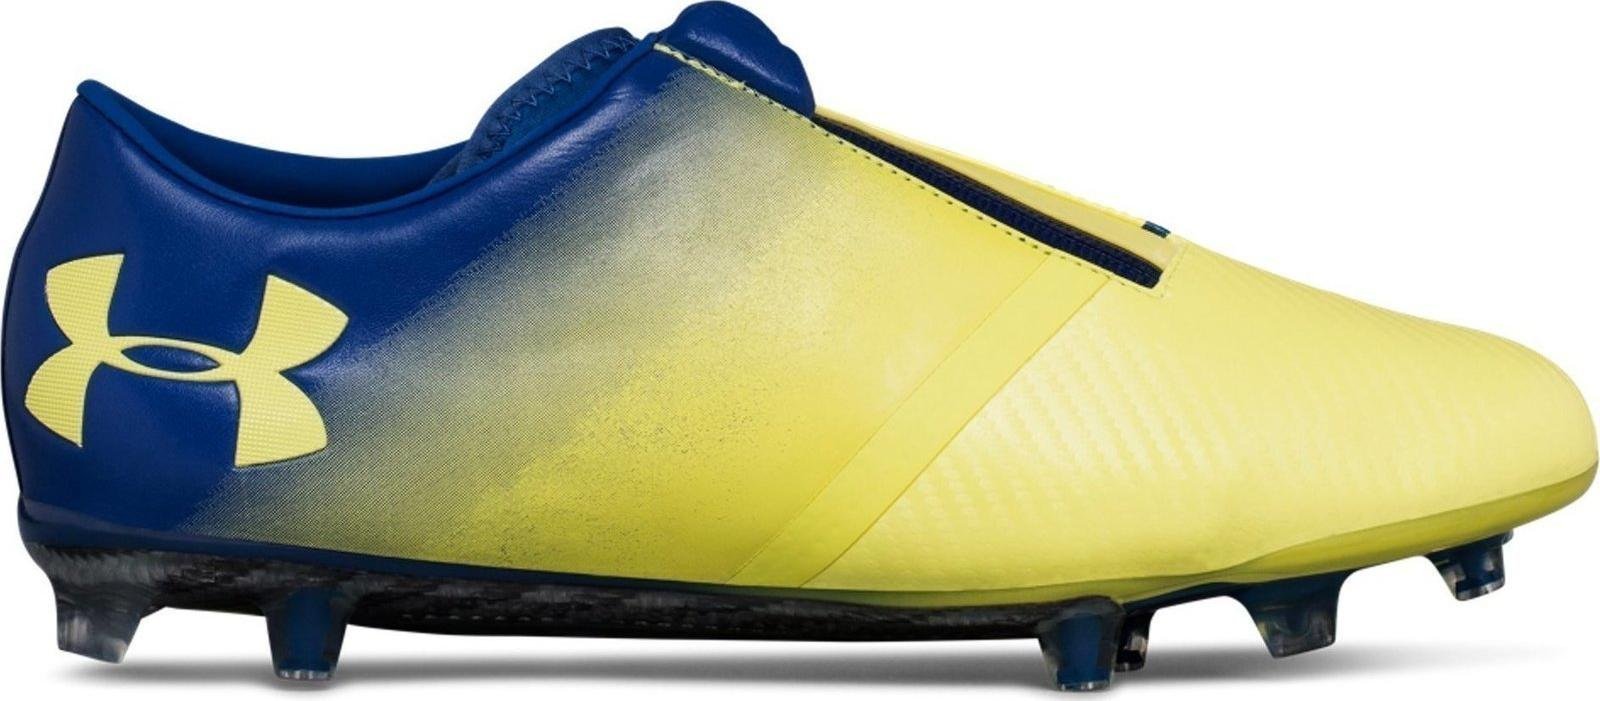 under armour cleats 219